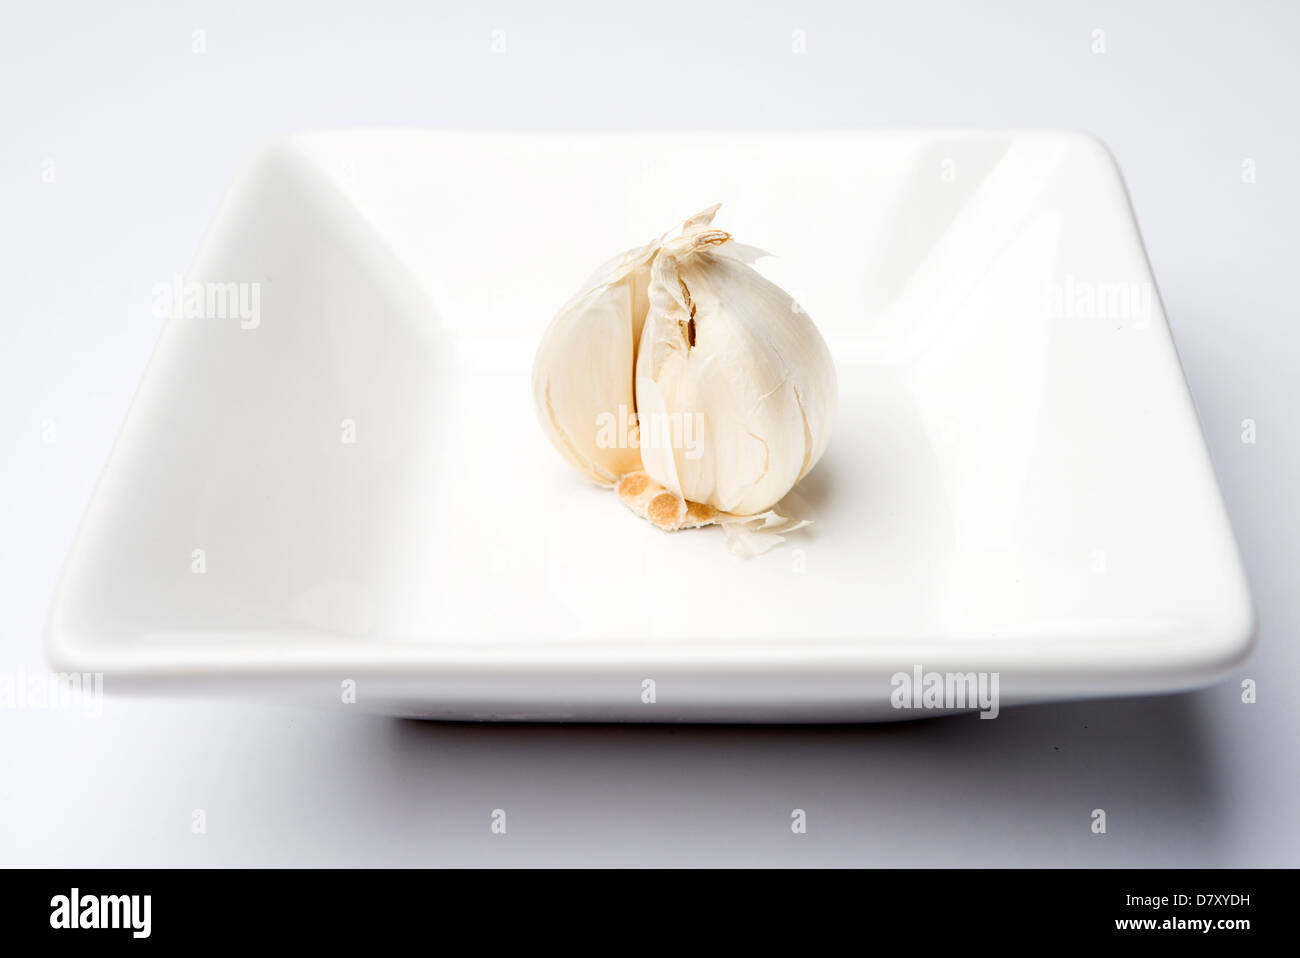 close up of a garlic bulb on a white plate Stock Photo